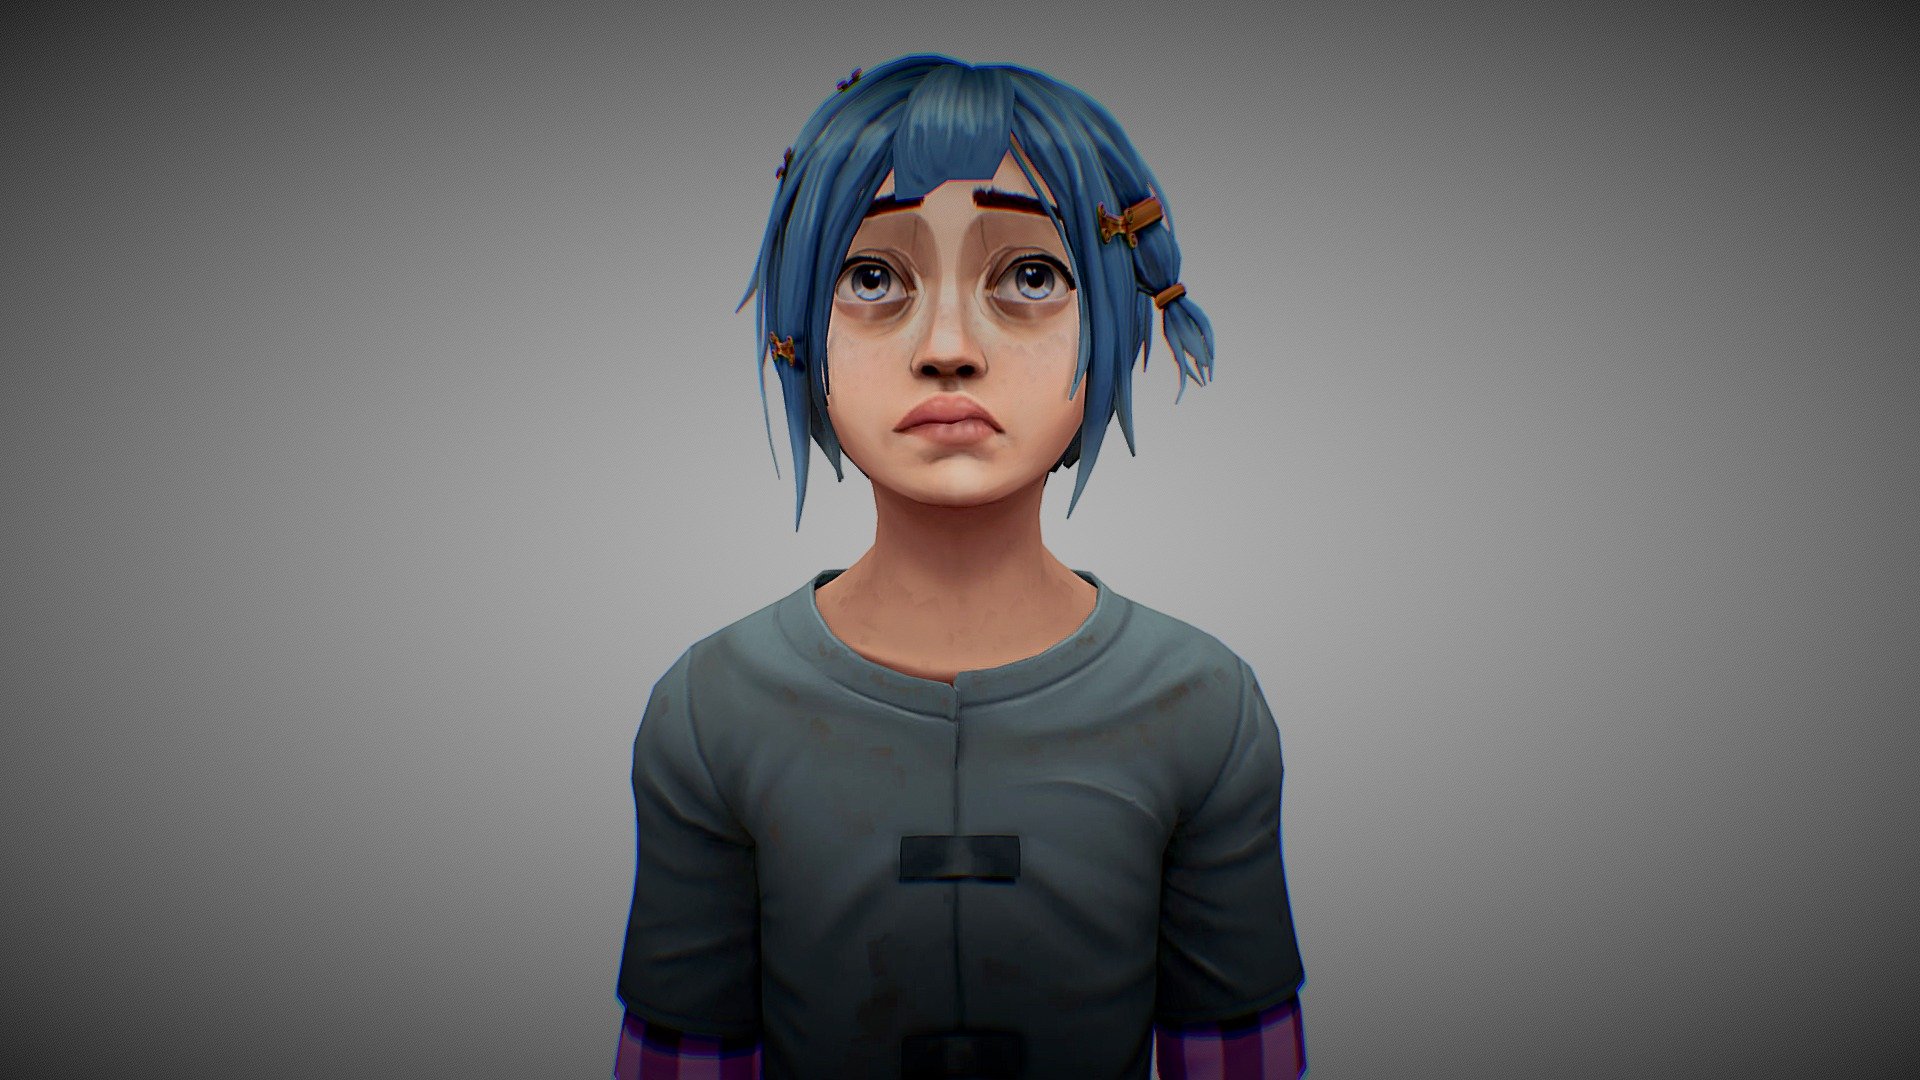 a model of powder (jinx) from tv series arcane leauge of legends

This model was created using zbrush, blender and 3d coat 3d model